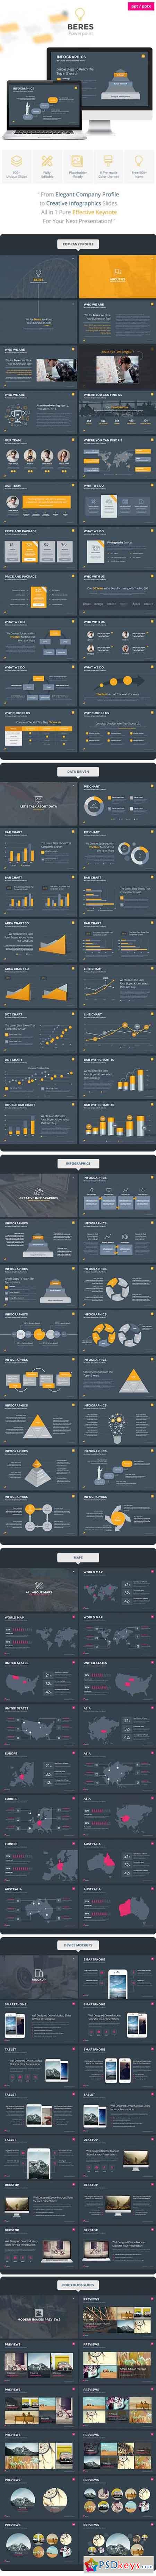 Beres - Powerpoint Template 12380043